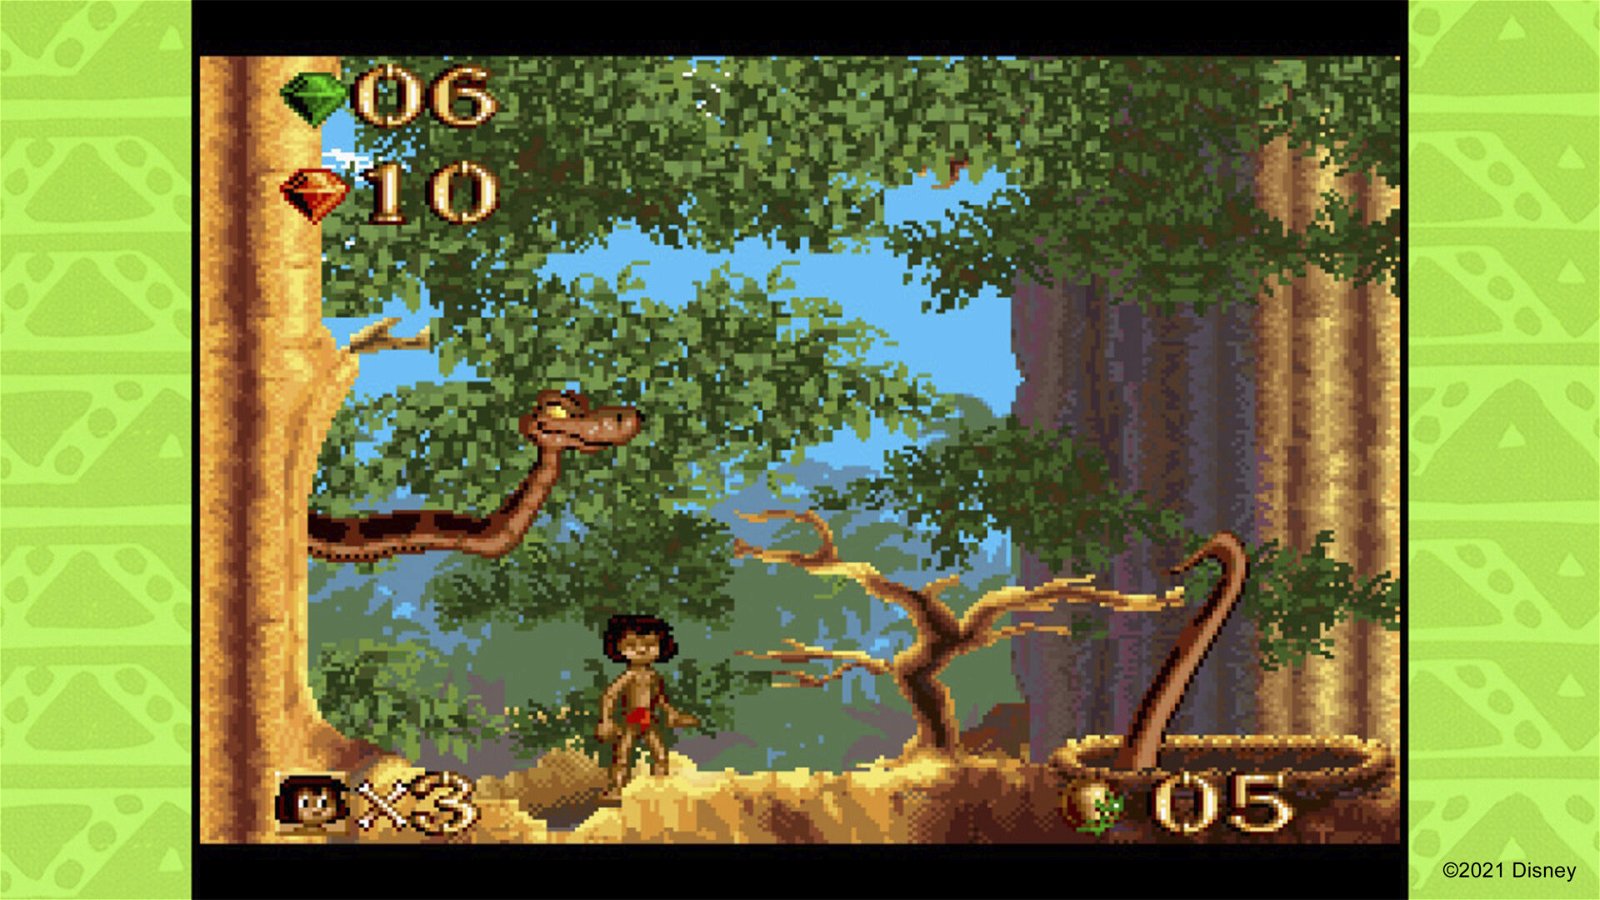 Disney Classic Games to Release 'The Jungle Book and MORE Aladdin Pack'